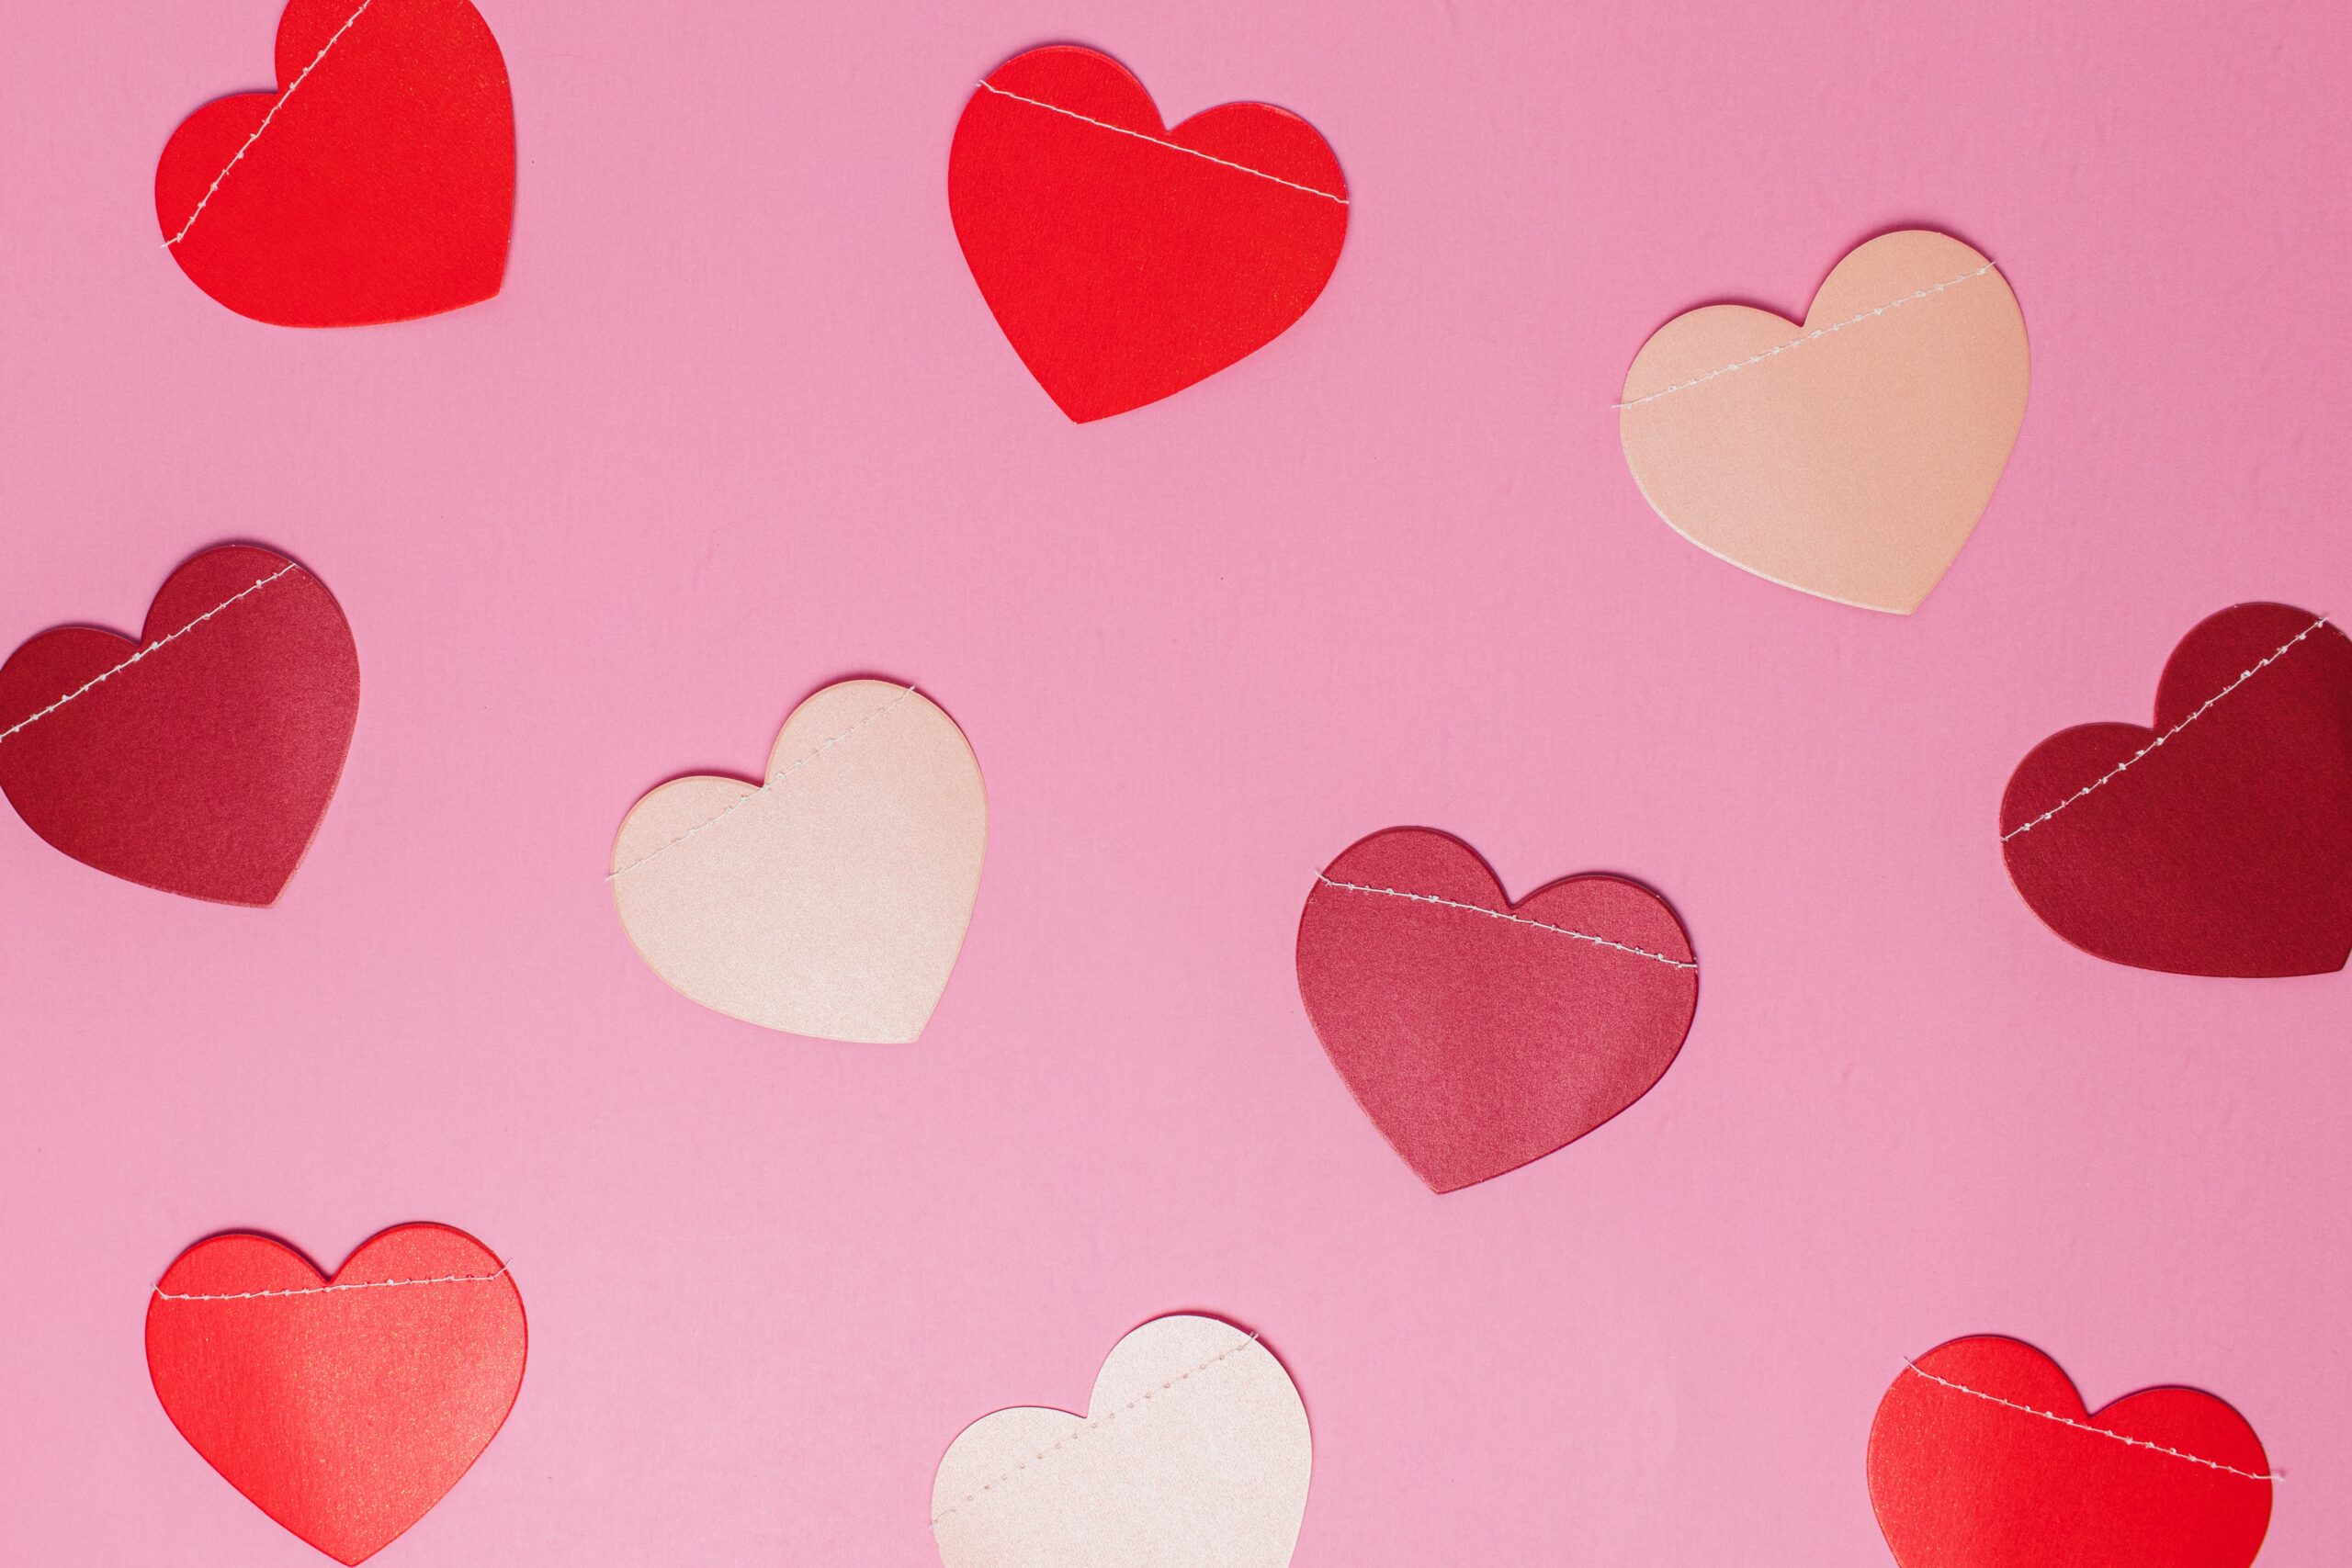 The Spiritual Meaning of the Valentine's Day